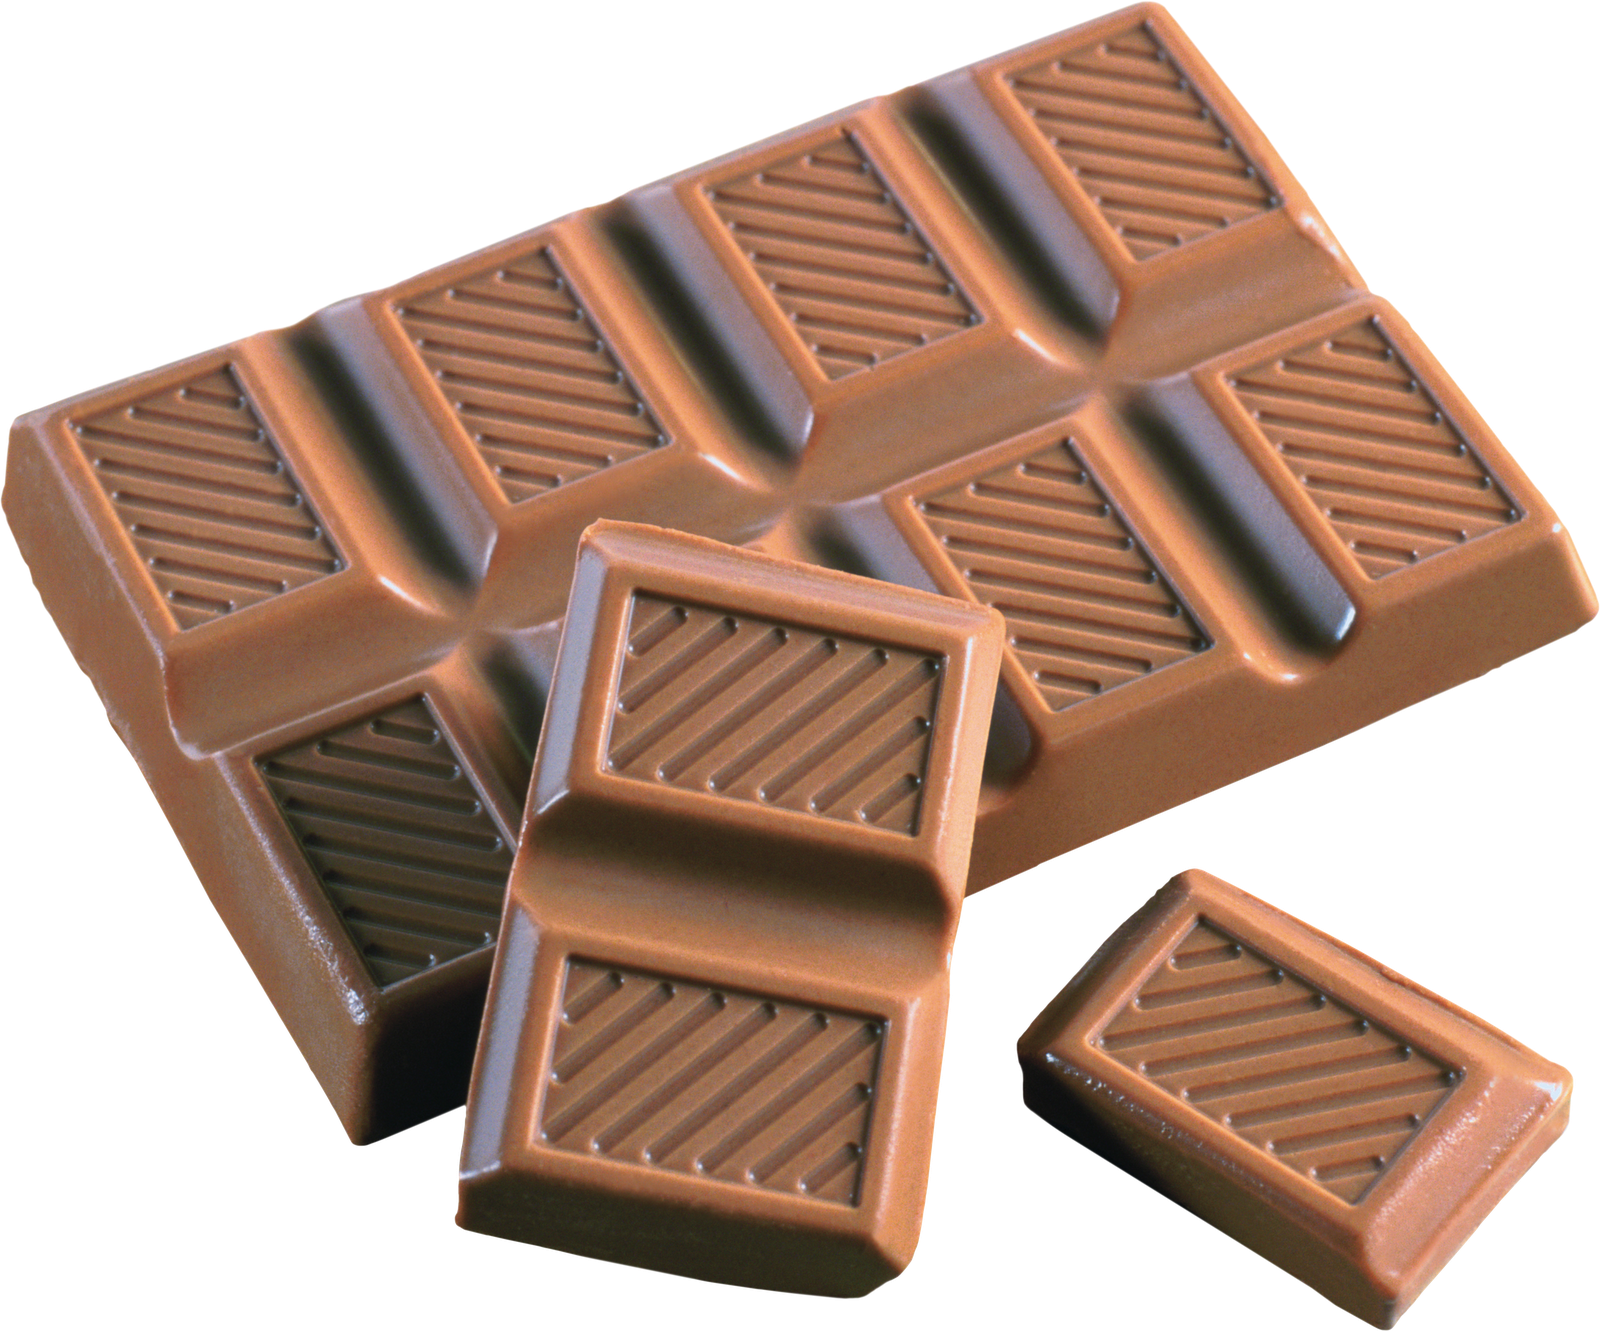 Chocolate Bar Png Image - Chocolate, Transparent background PNG HD thumbnail